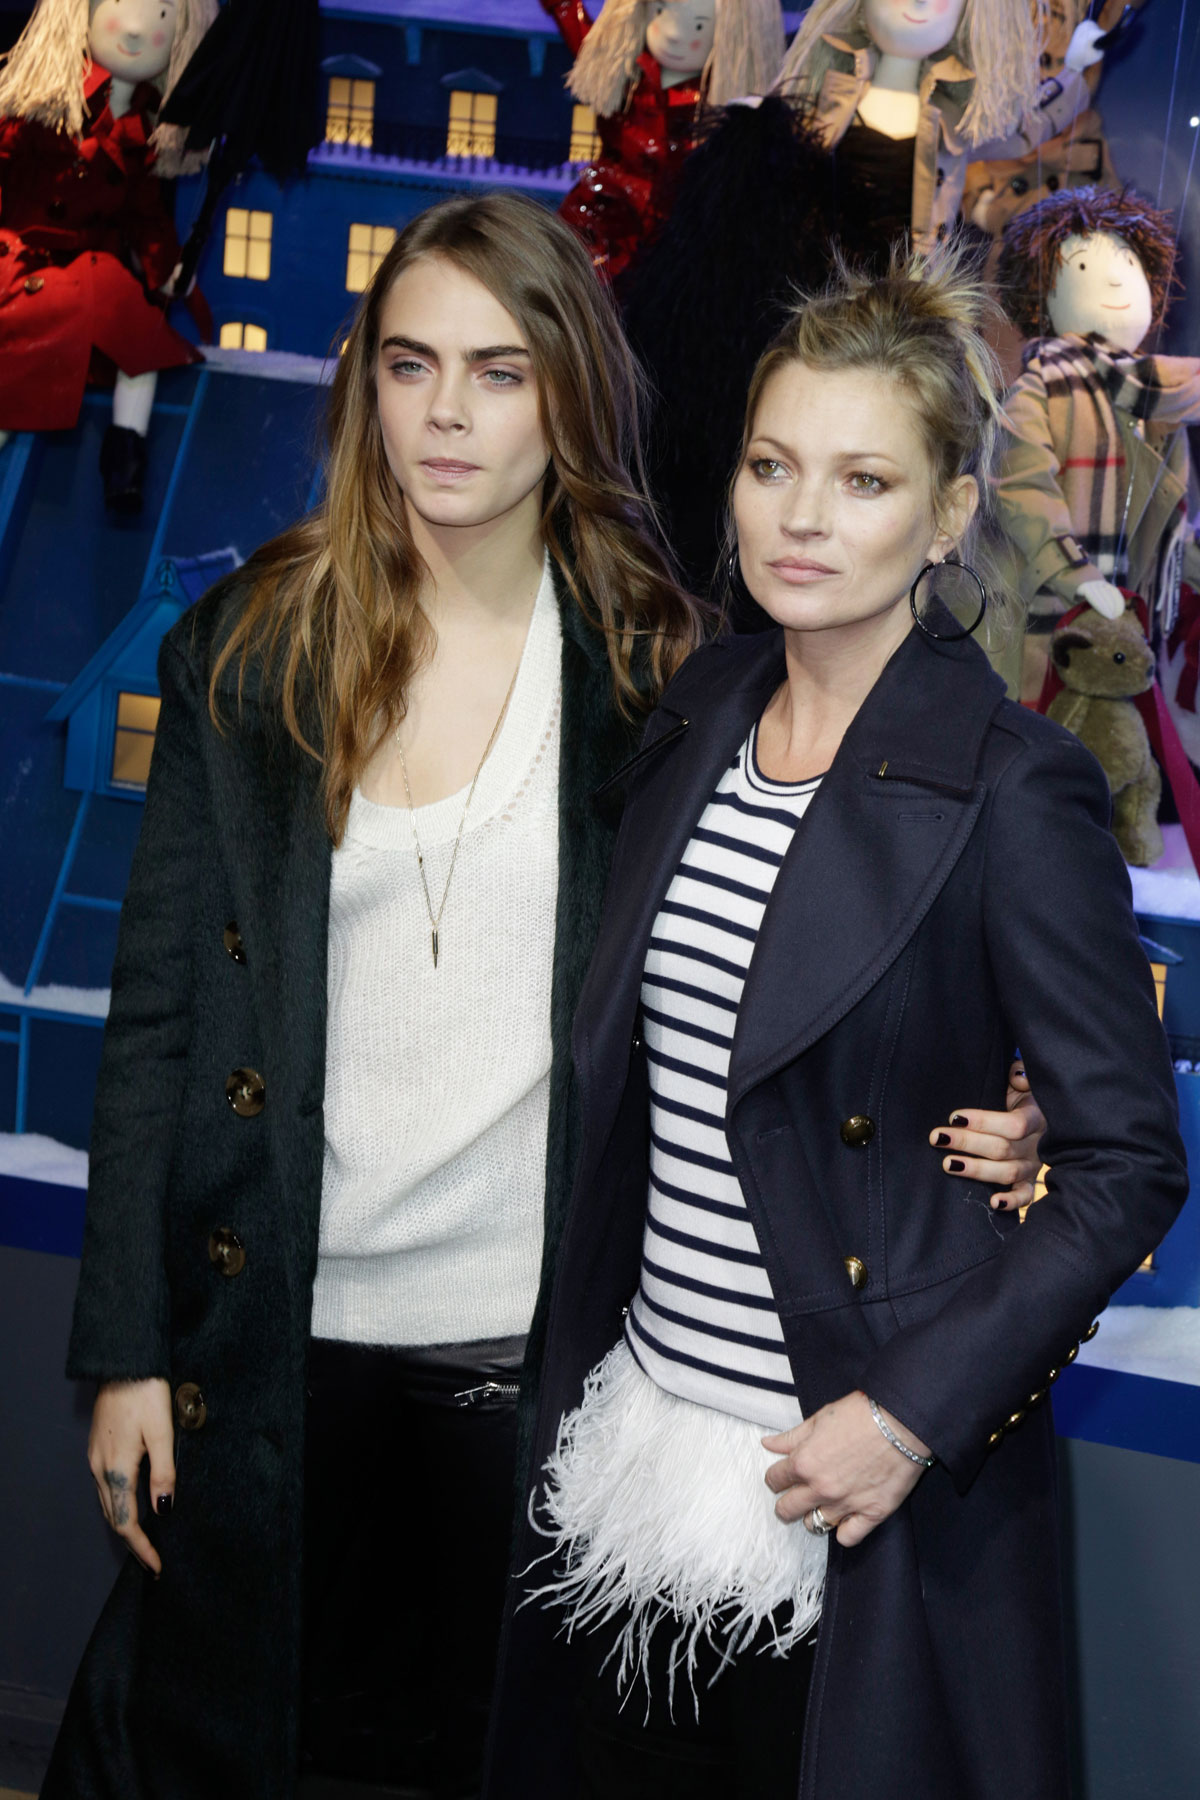 Cara Delevingne and Kate Moss attend the Printemps Christmas Decorations Inauguration